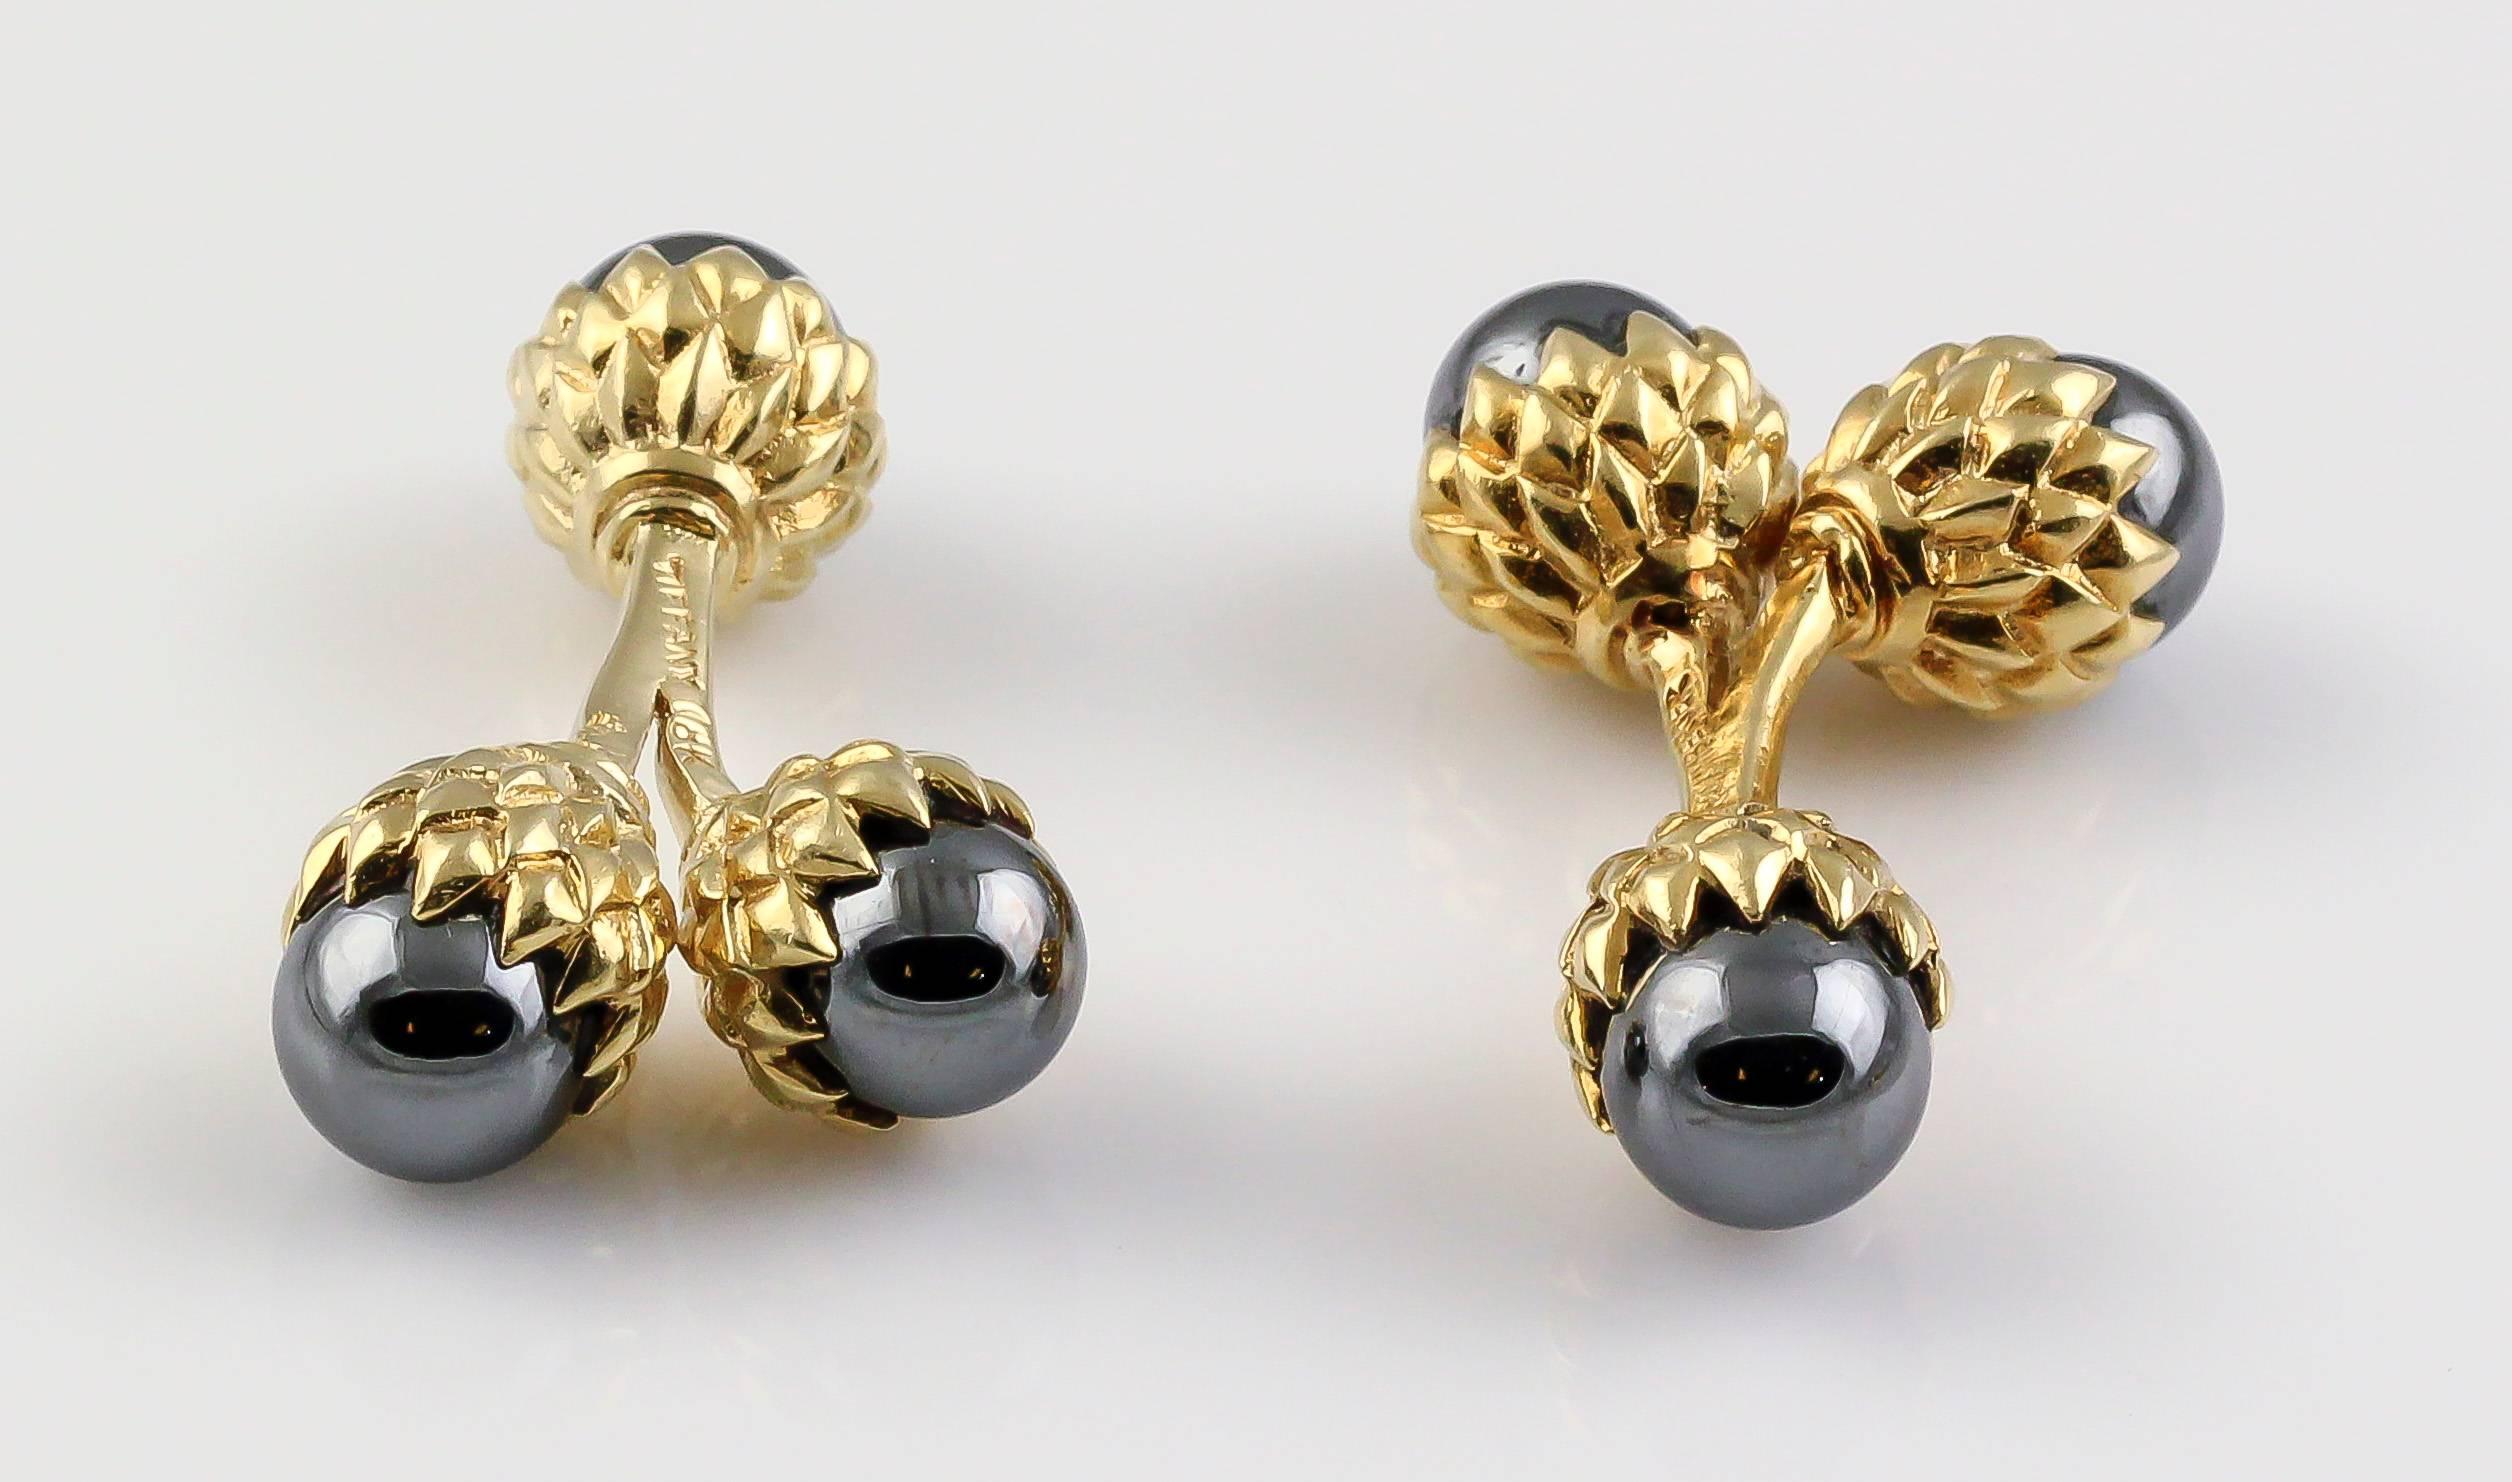 Rare and unusual hematite and 18K yellow gold double acorn cufflinks by Tiffany & Co. Schlumberger. These are much harder to find than the single acorn cufflinks, which retail for $2400. Beautifully made and strikingly handsome.

Hallmarks: